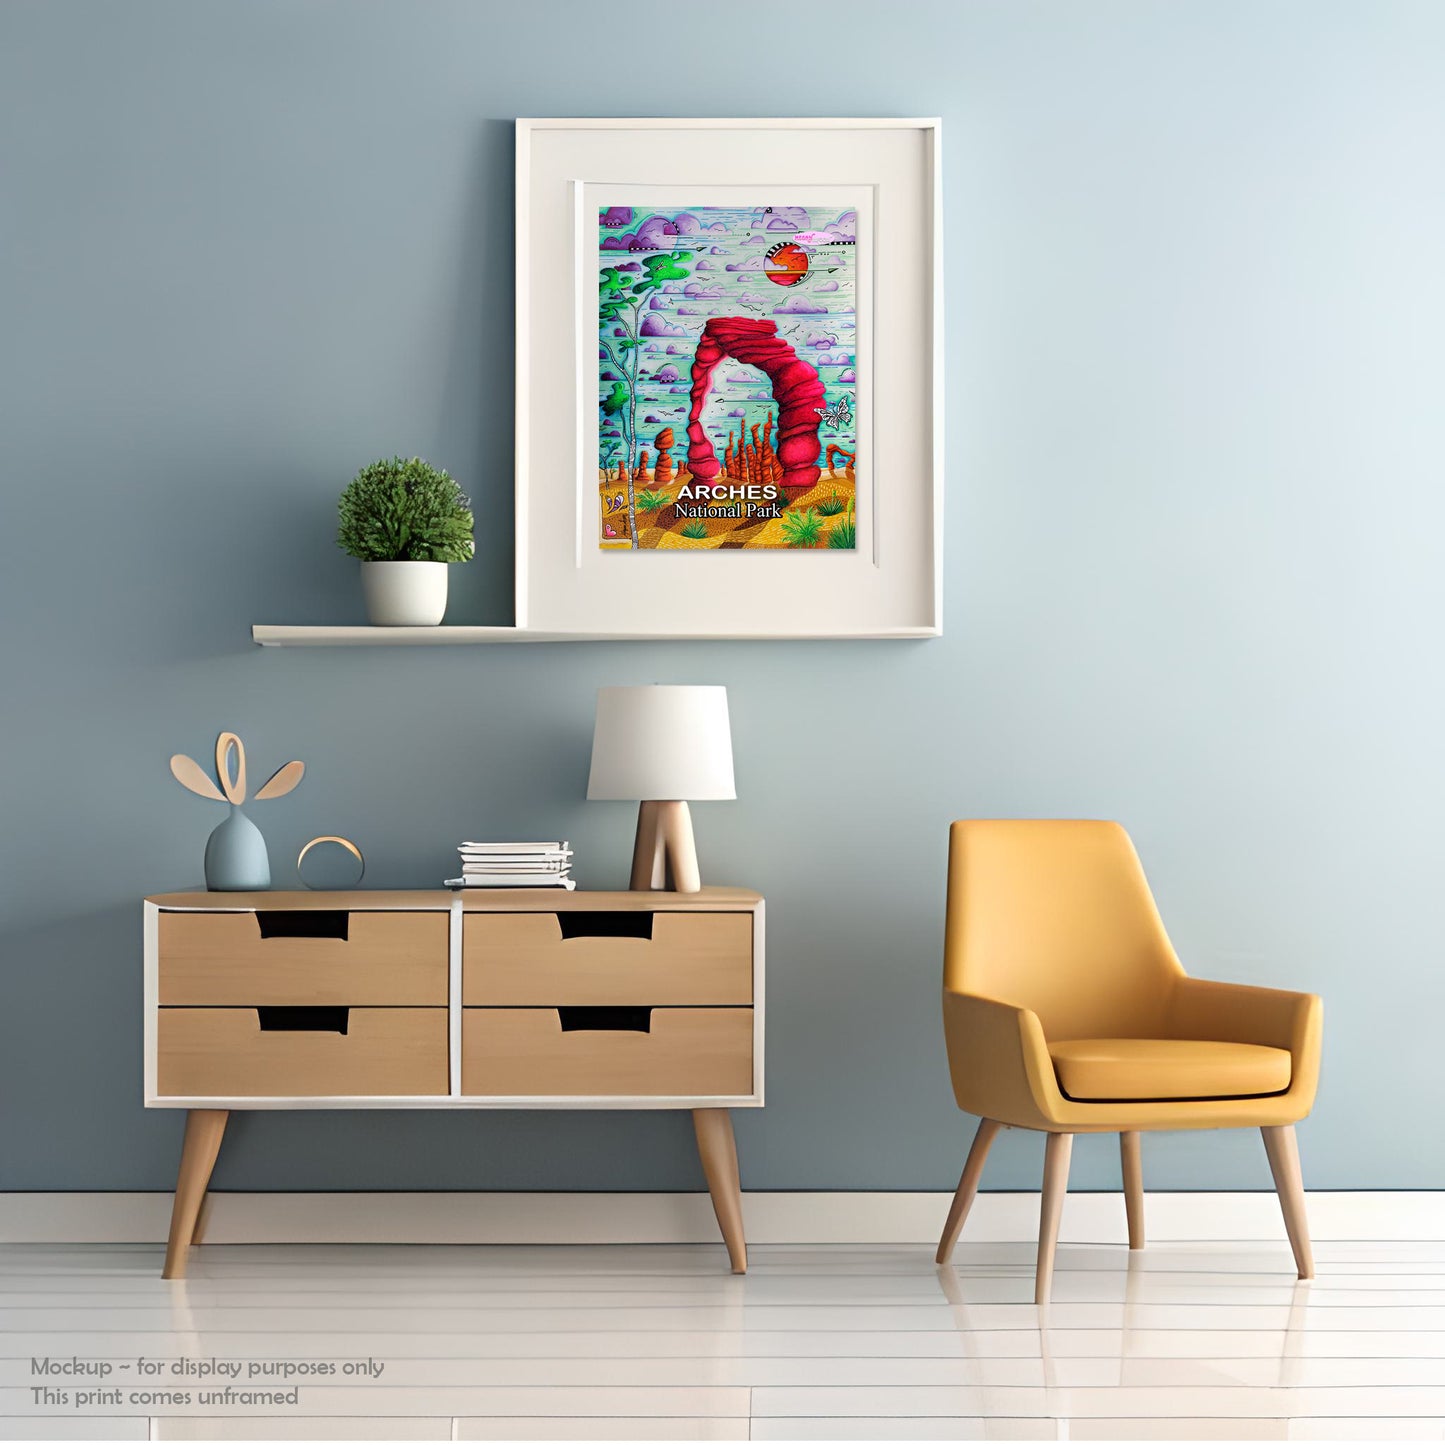 Arches National Park Travel Poster, Unframed Visit Utah Travel Art, Maximalist Home Office Decor Print For Her Original Art of Delicate Arch